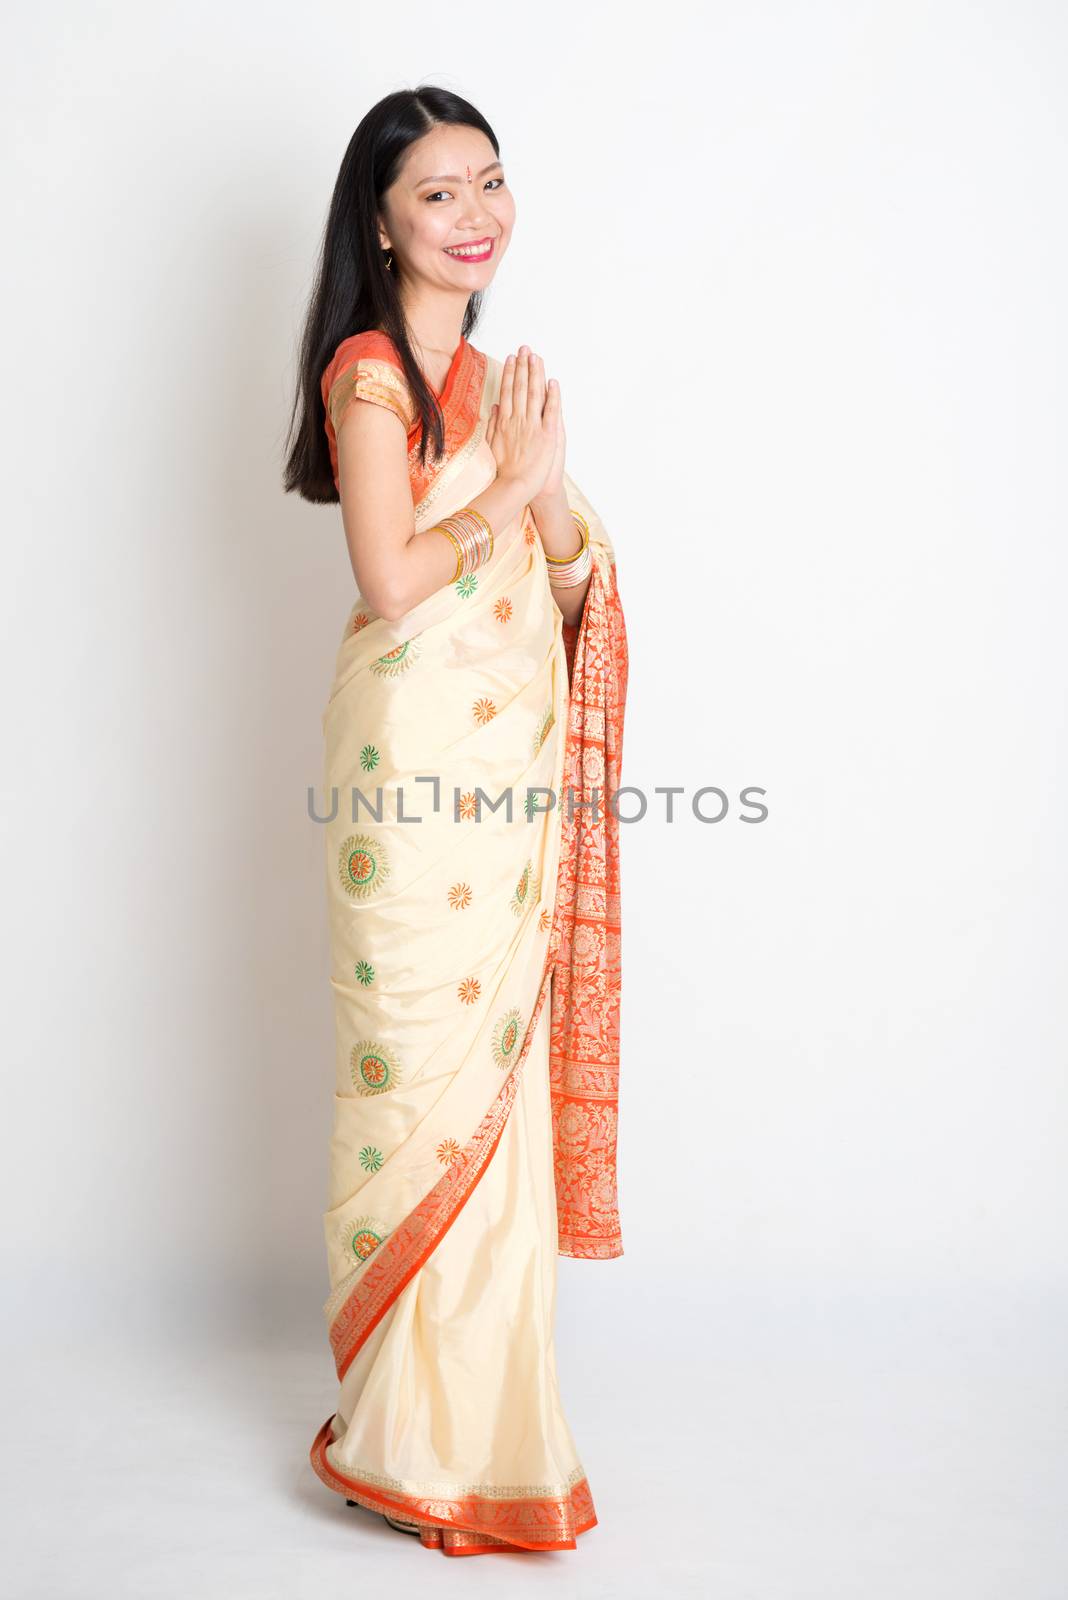 Full length mixed race Indian Chinese girl with sari dress in greeting gesture, standing on plain background.